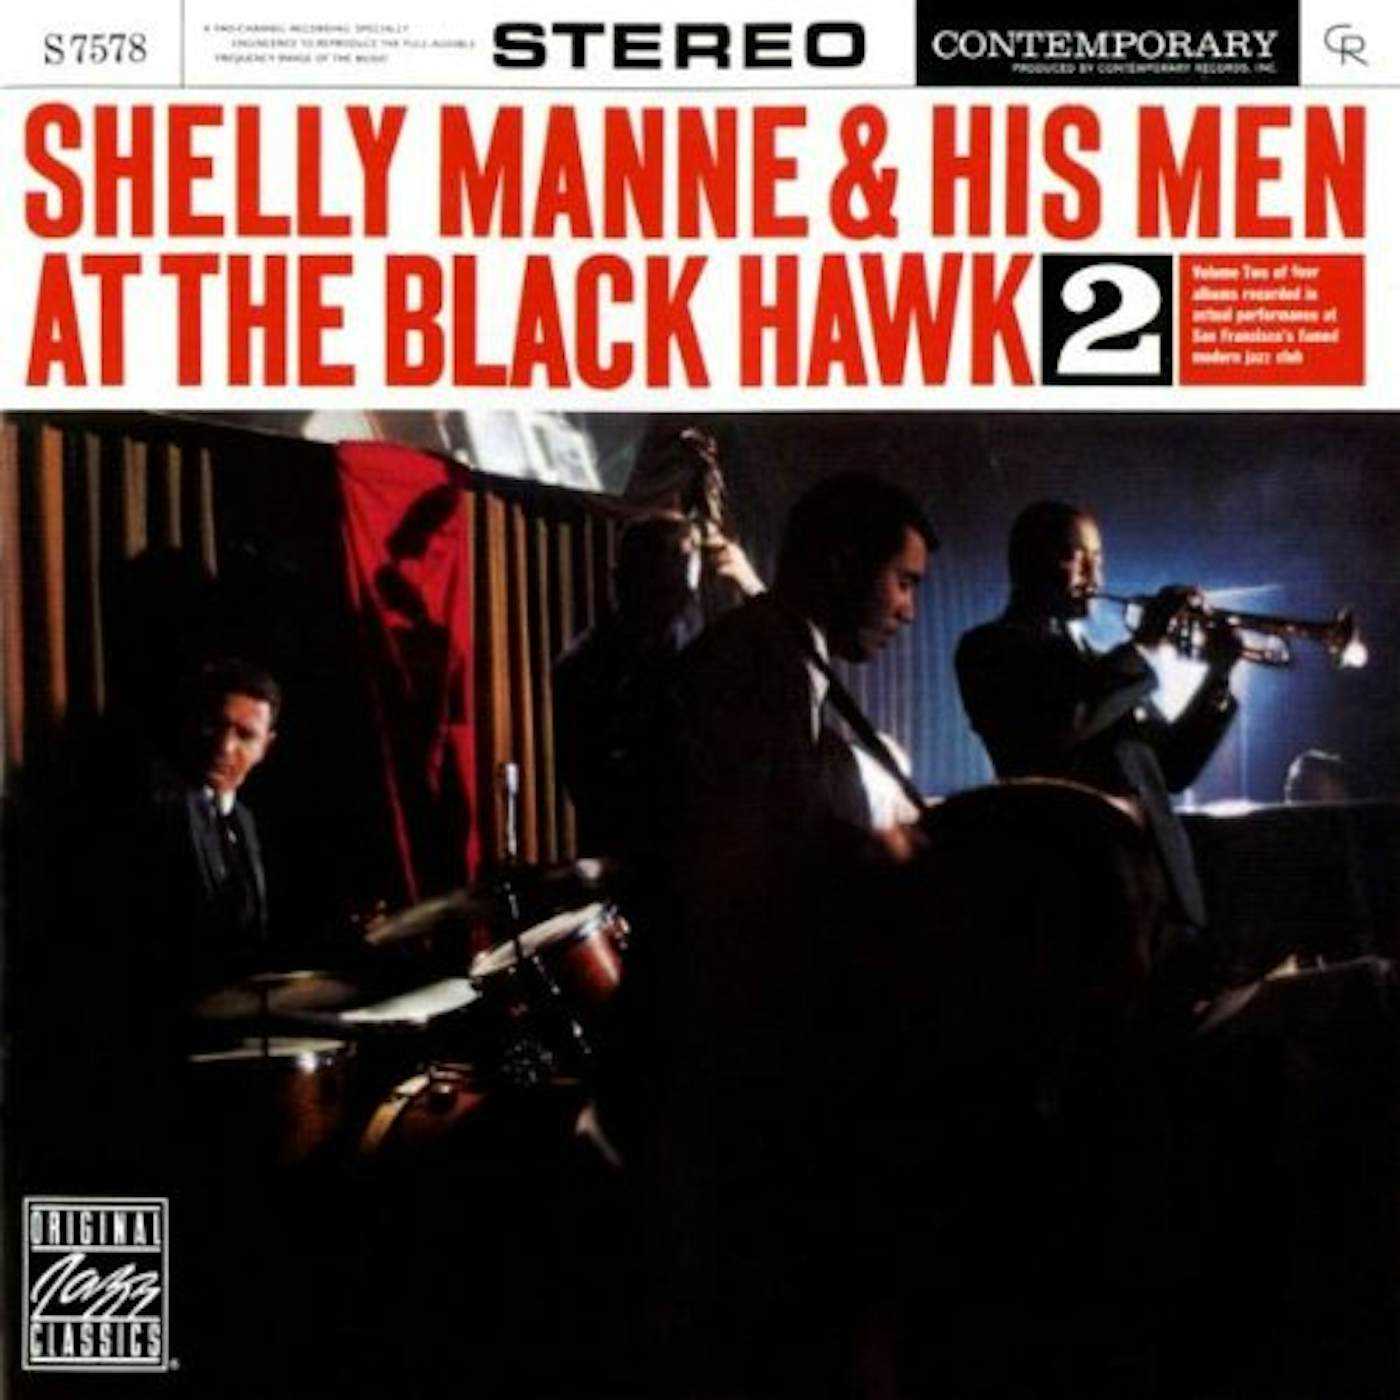 Shelly Manne & His Men LIVE AT THE BLACK HAWK 2 CD